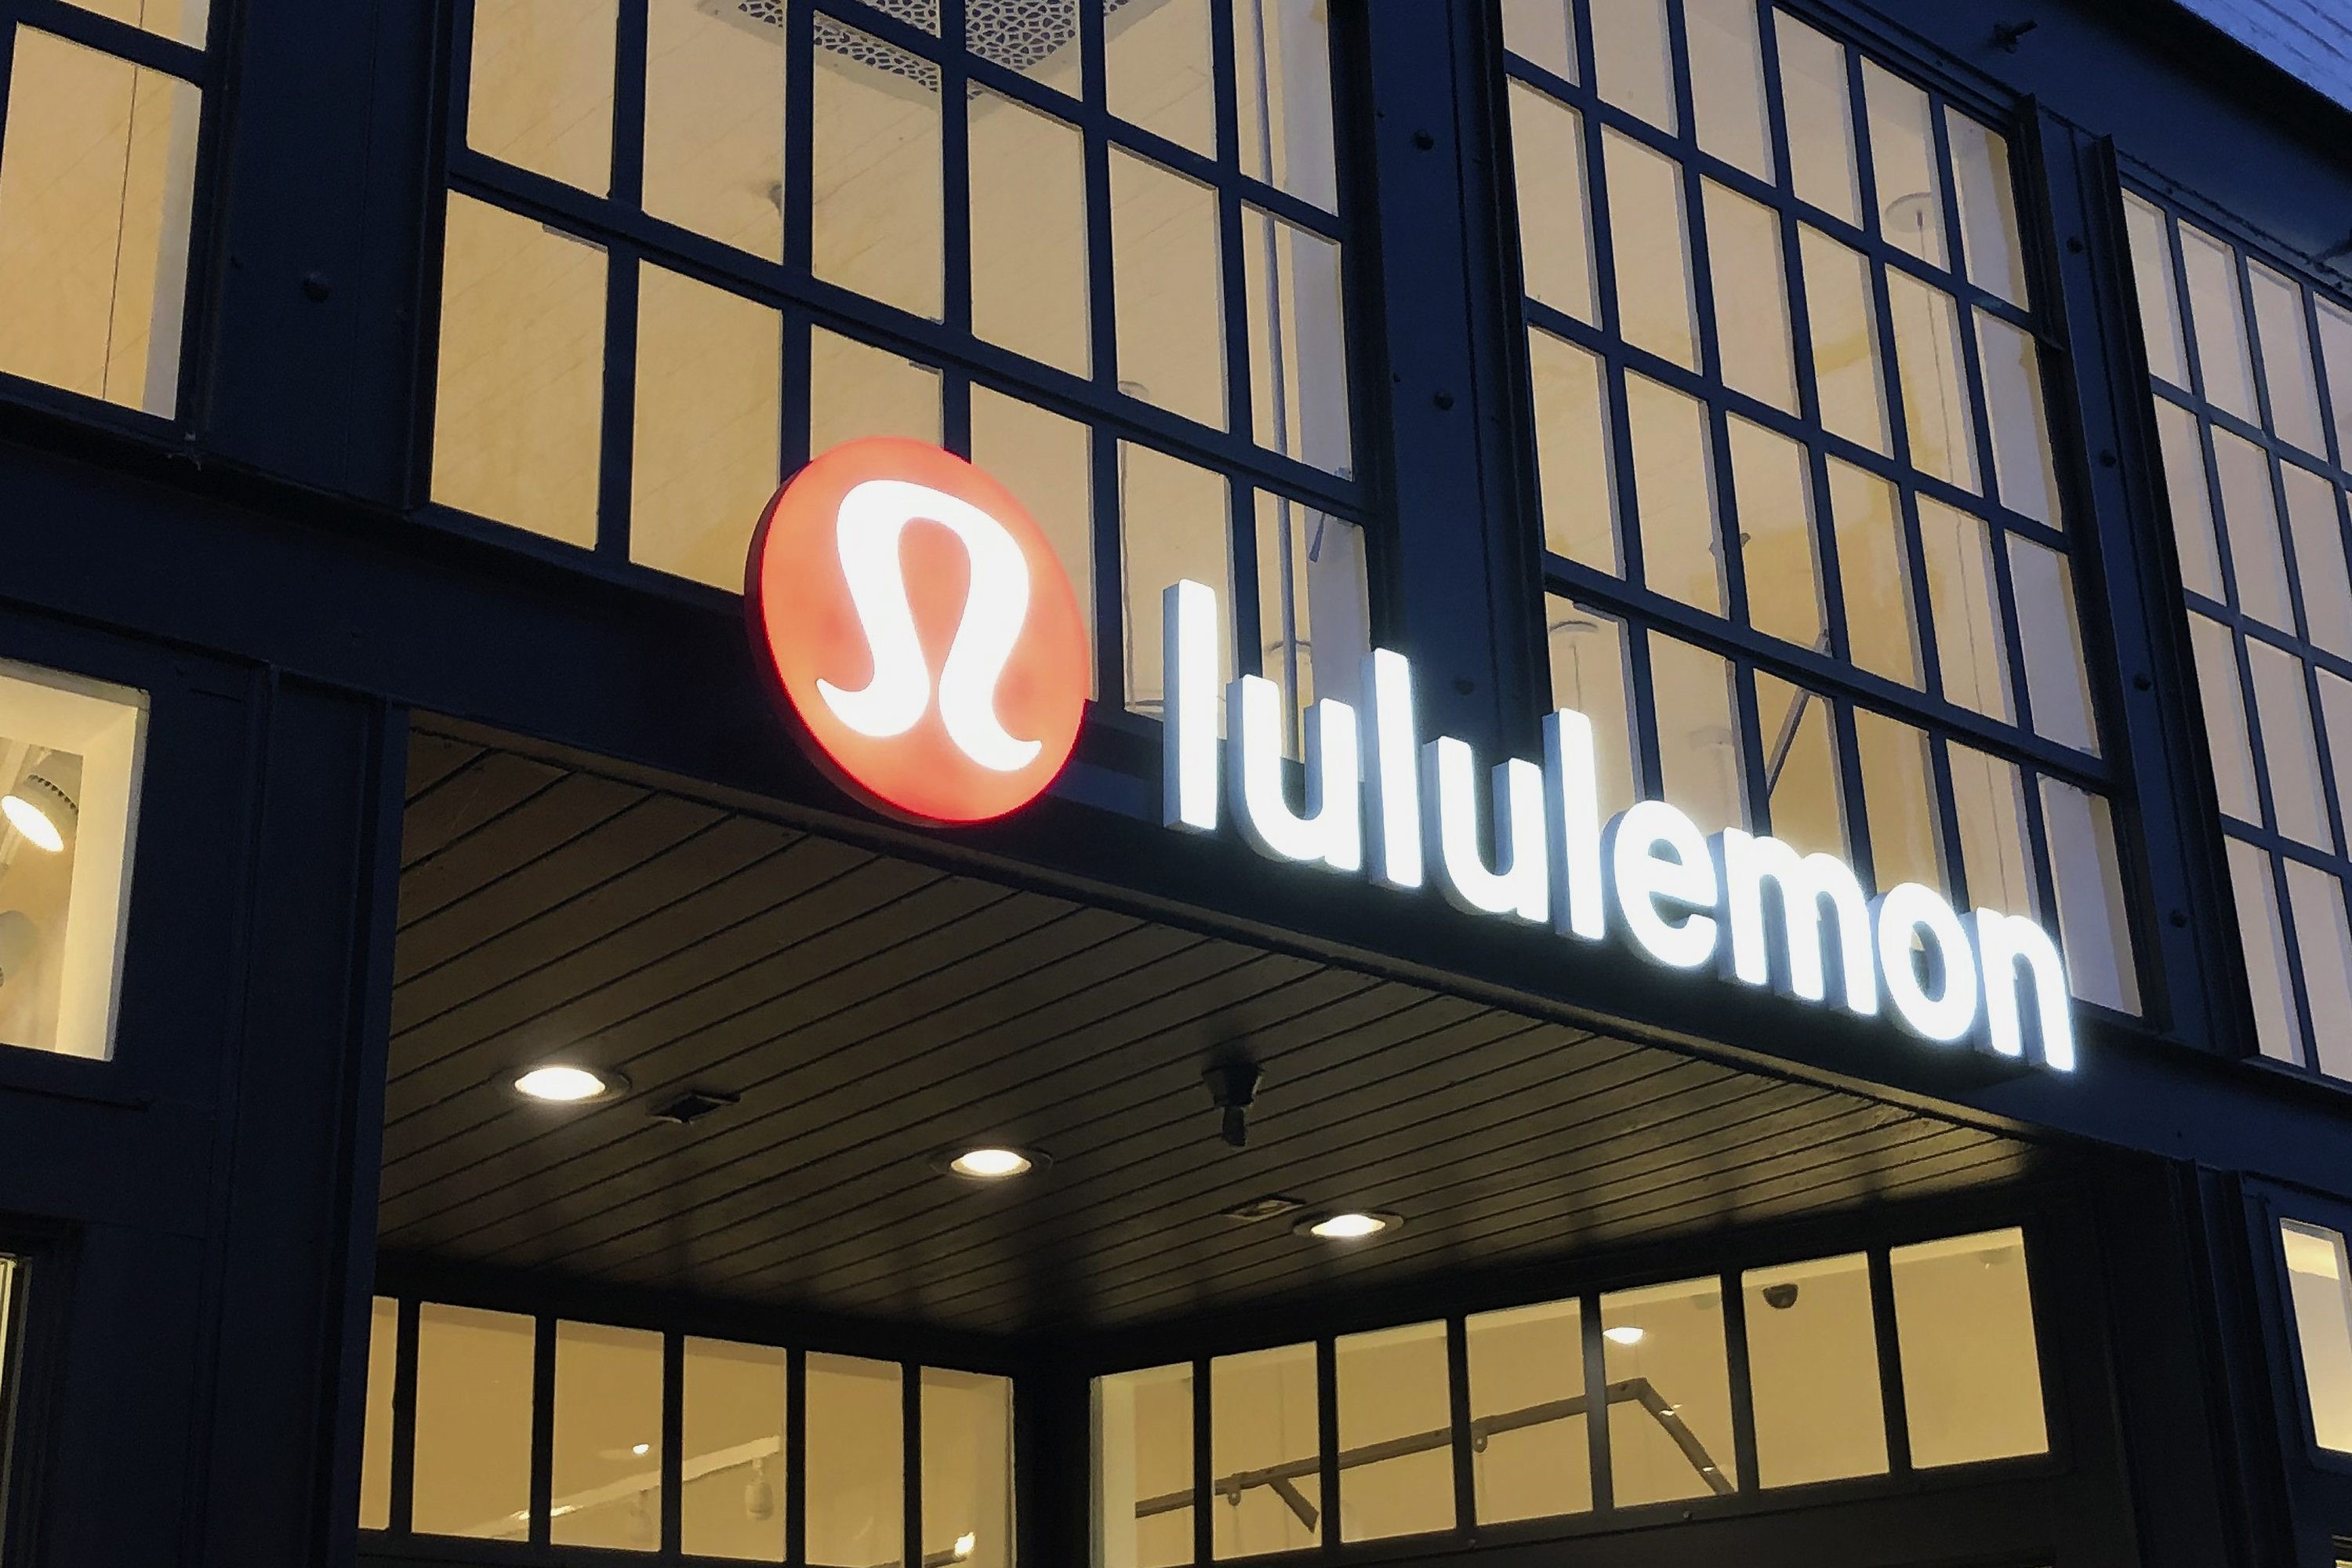 Lululemon buys at-home exercise startup 